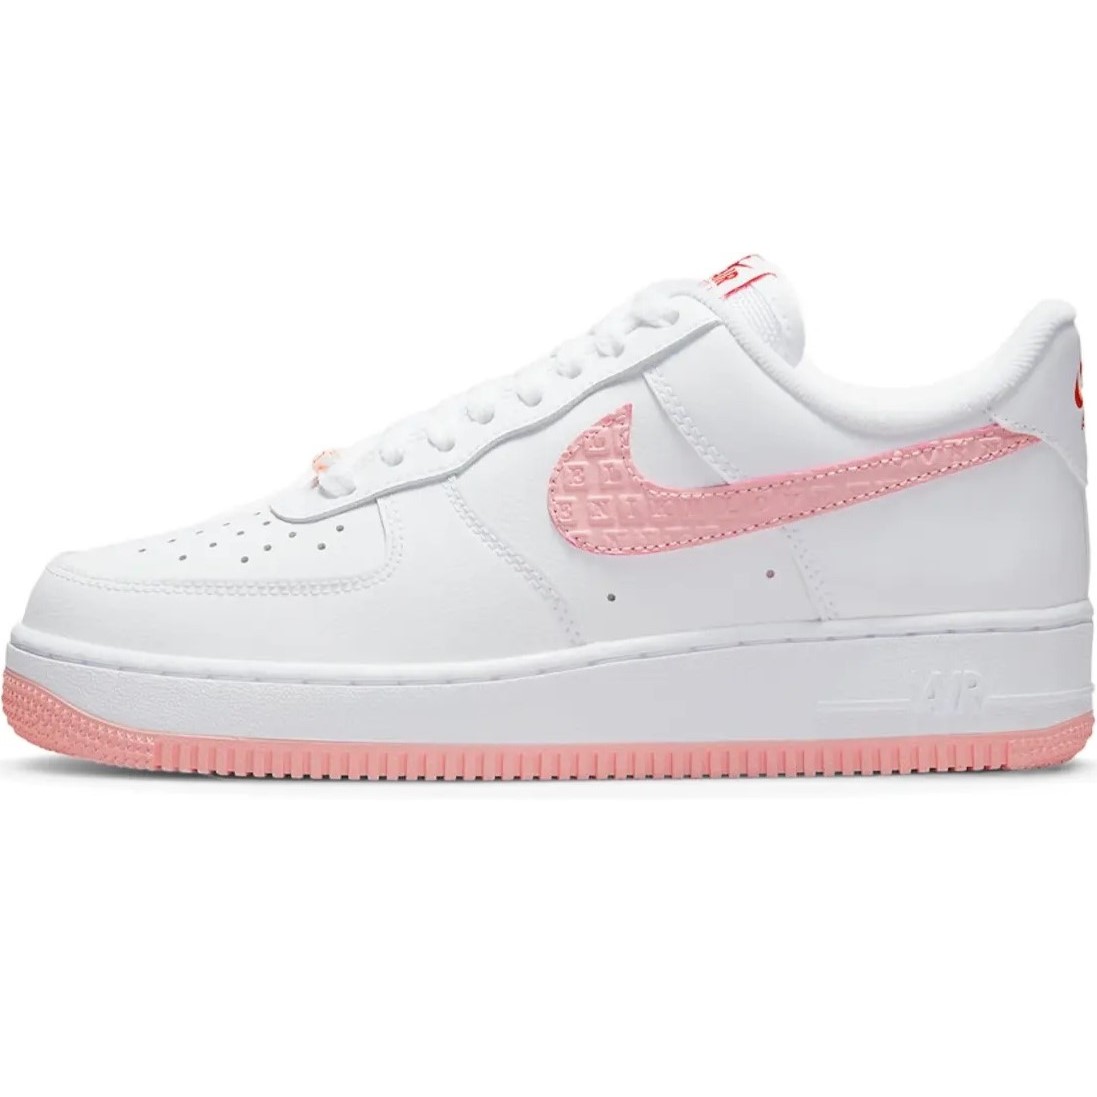 GIÀY NỮ NIKE AIR FORCE 1 07 LOW VD VALENTINE S DAY WHITE ATMOSPHERE UNIVERSITY RED SAIL DQ9320-100 9